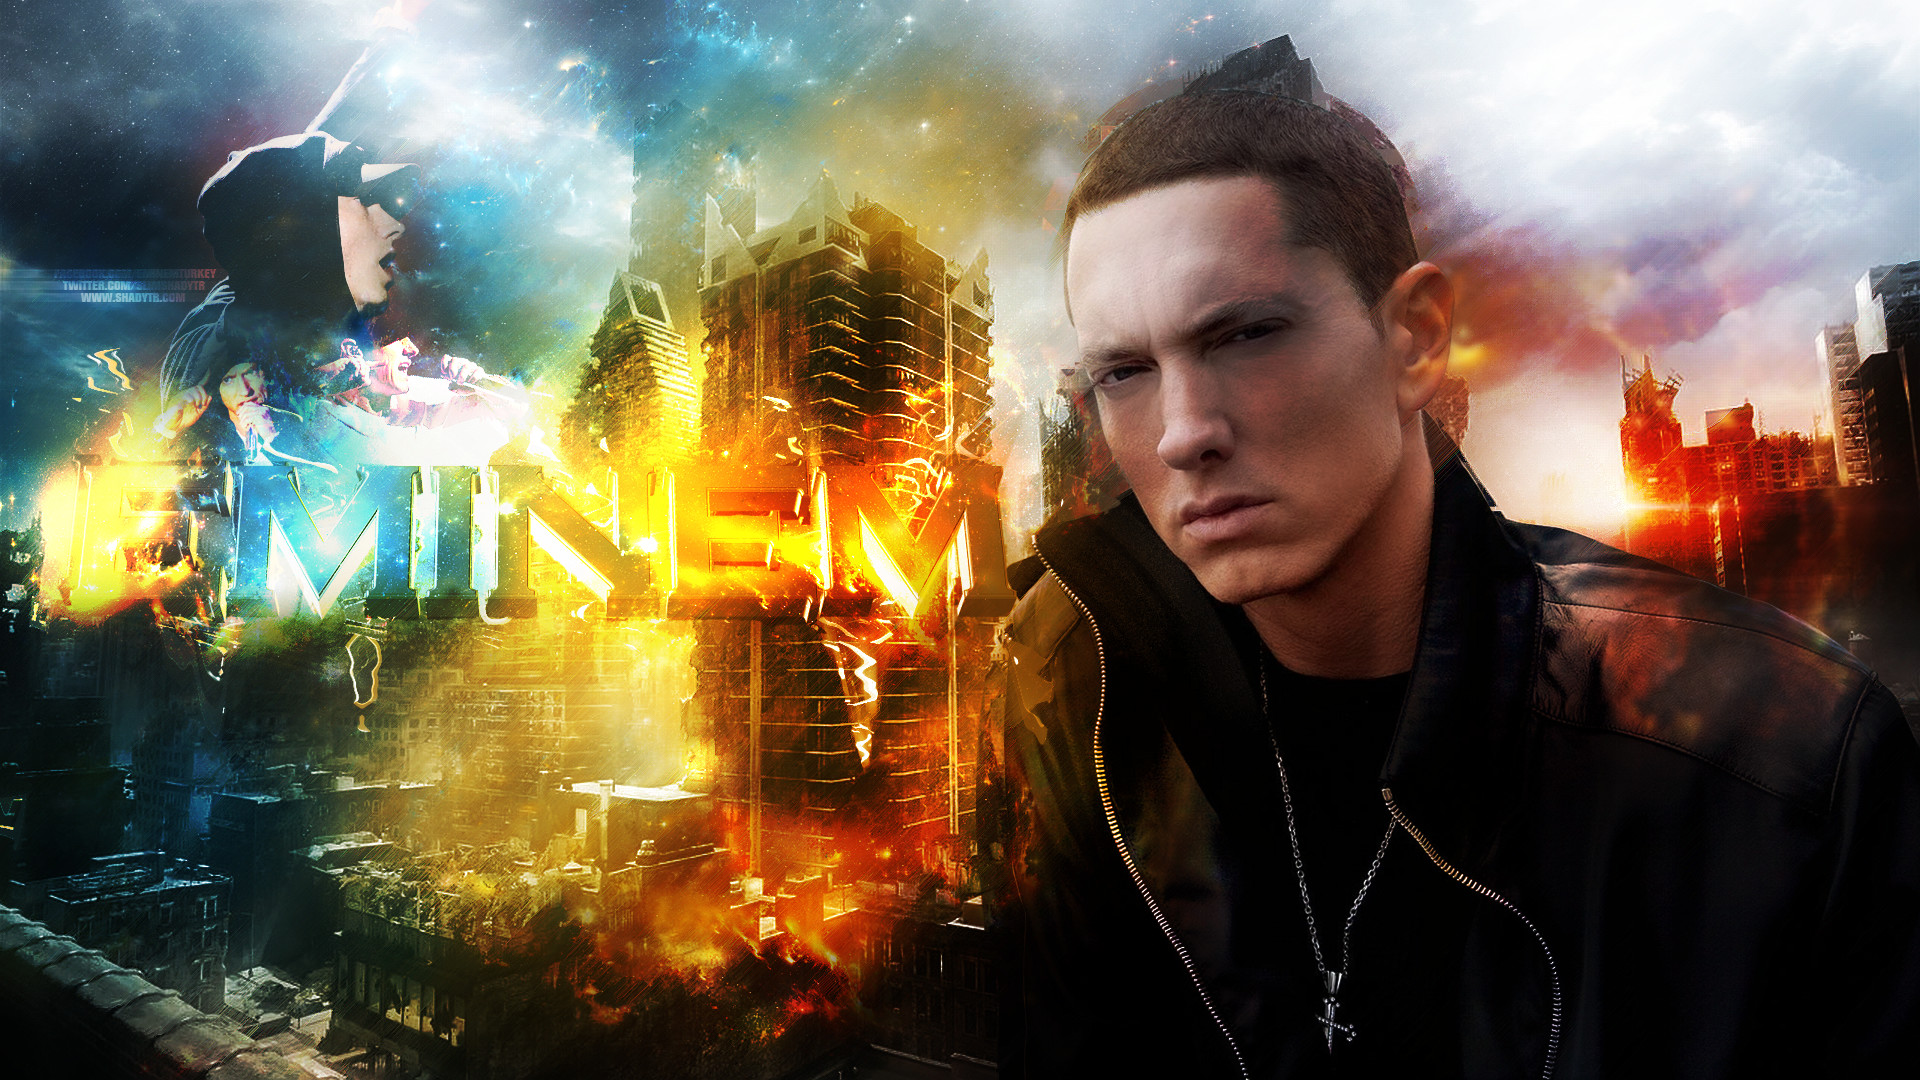 1920x1080, High Quality Photo Of Eminem American Popular - Cool Wallpapers Of Eminem - HD Wallpaper 